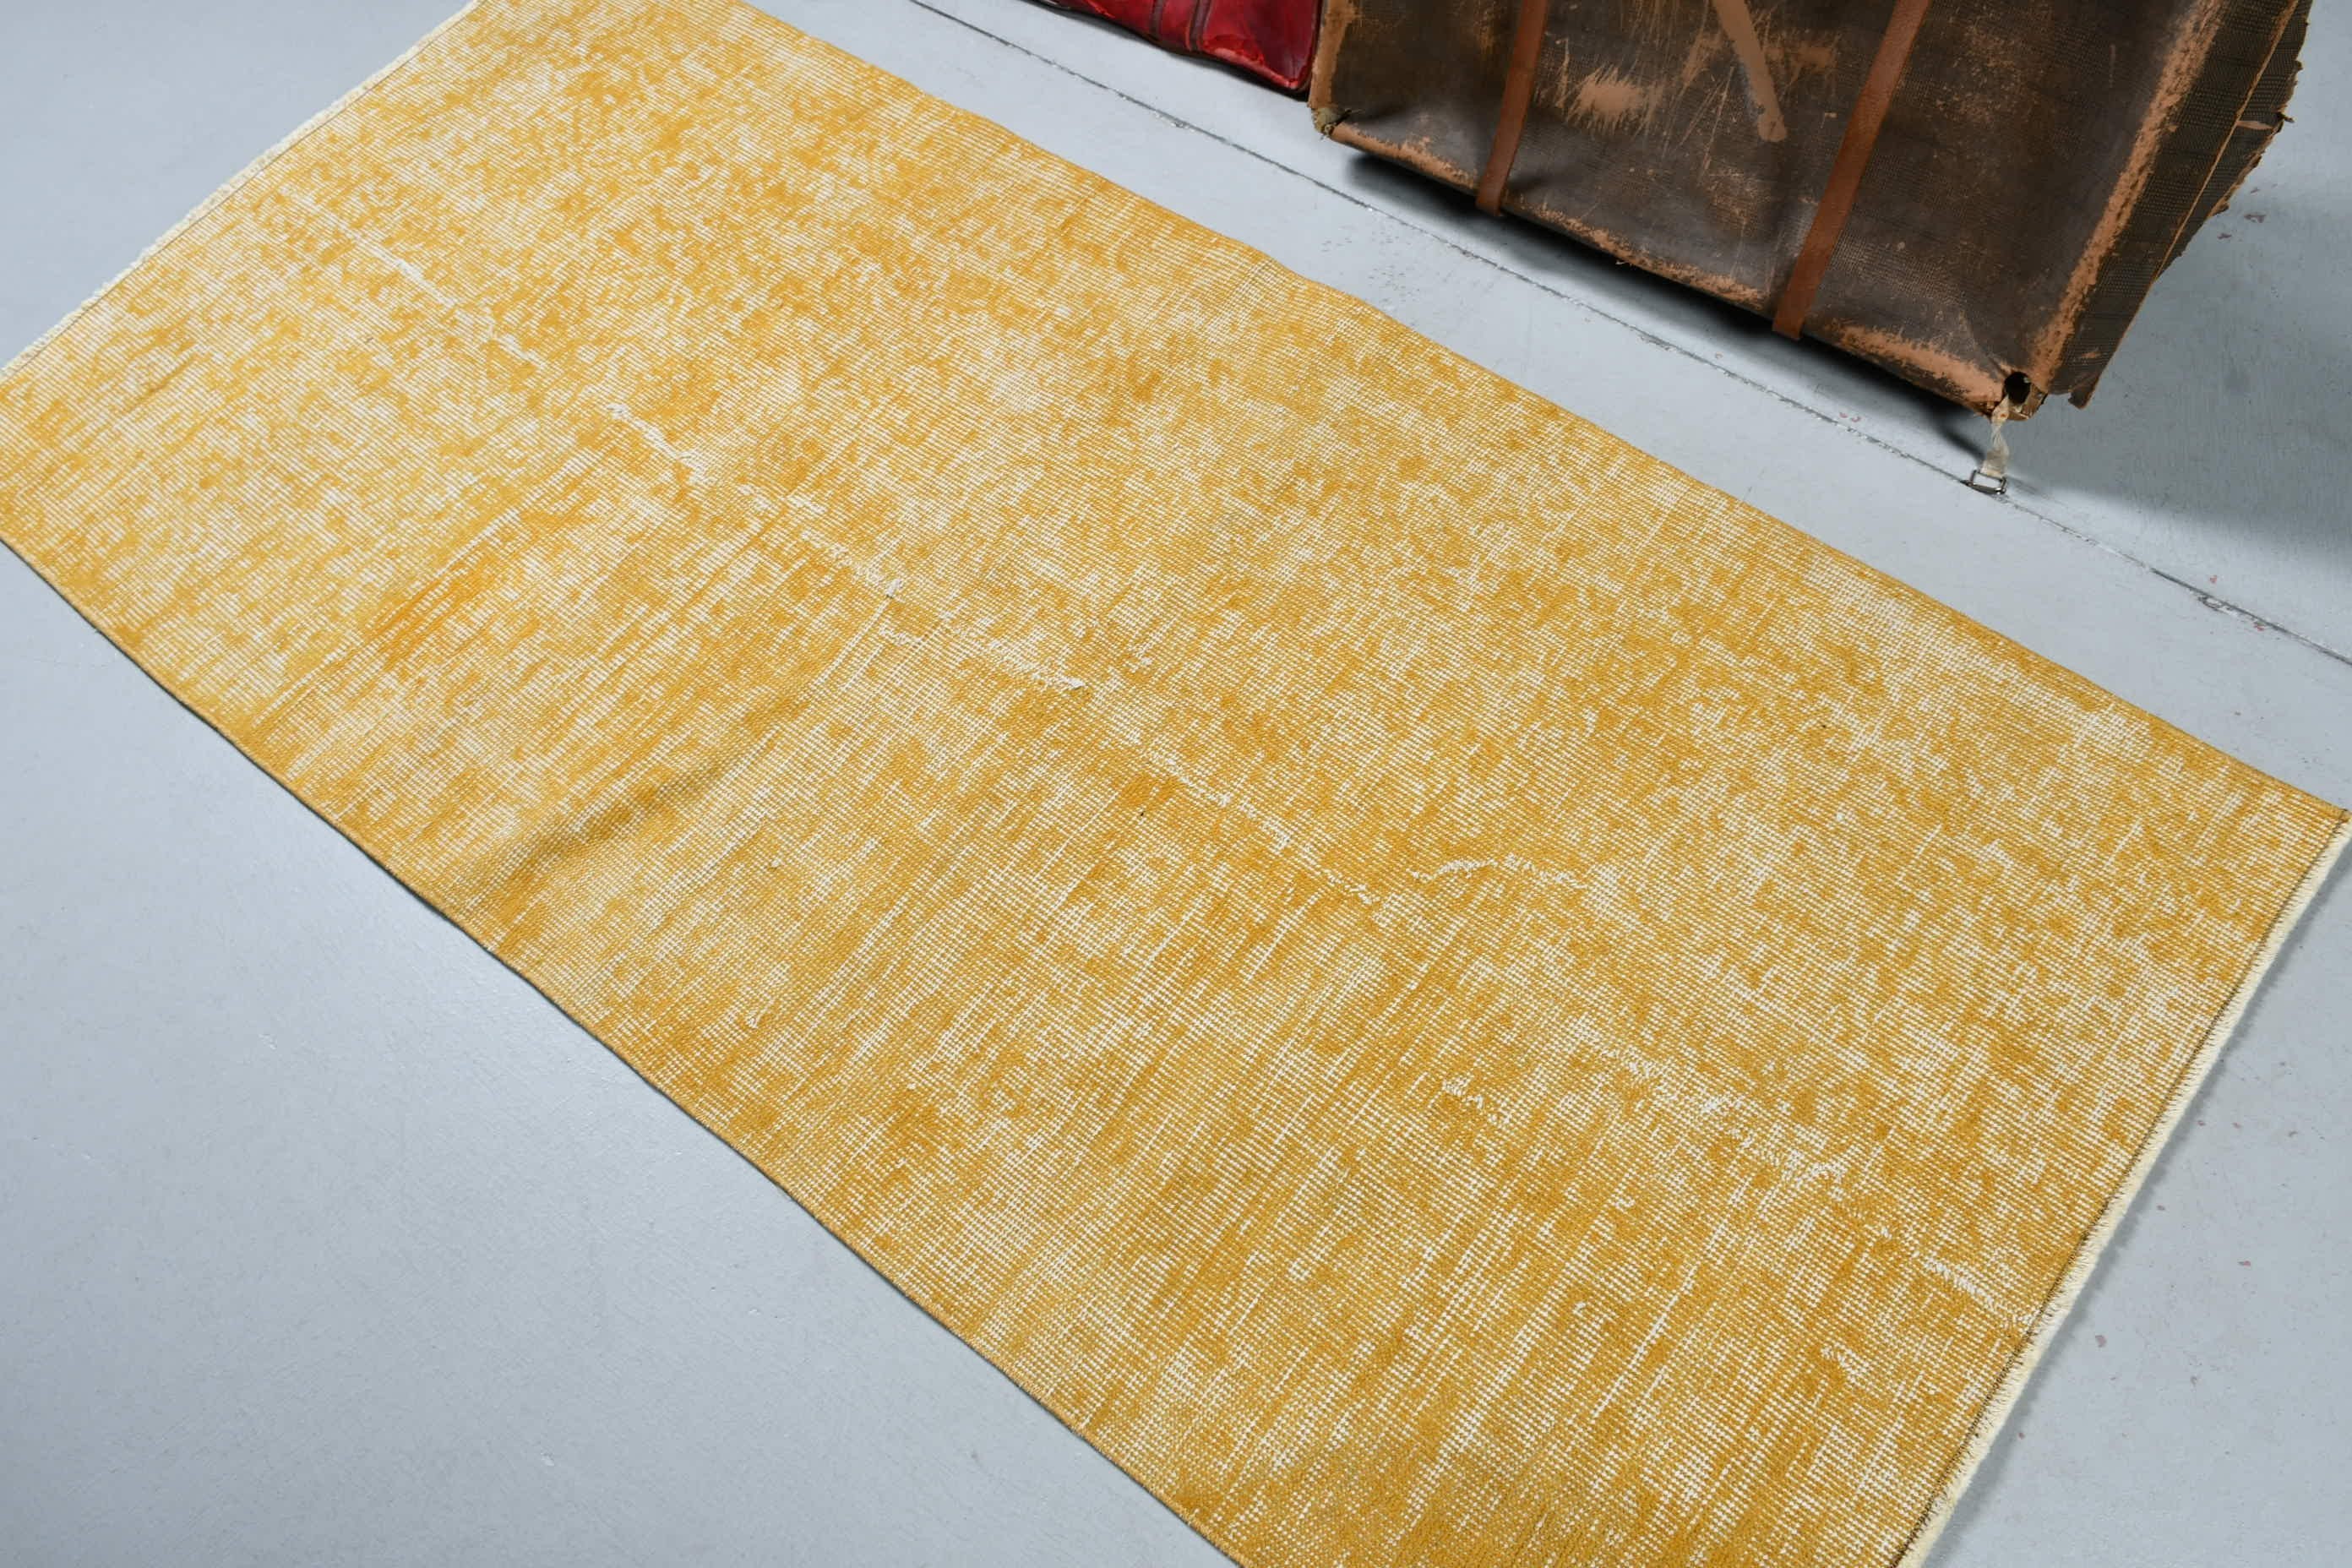 Oushak Rugs, Yellow Antique Rugs, Nursery Rug, Entry Rug, Turkish Rugs, Moroccan Rug, 3.1x6.3 ft Accent Rugs, Aztec Rug, Vintage Rug